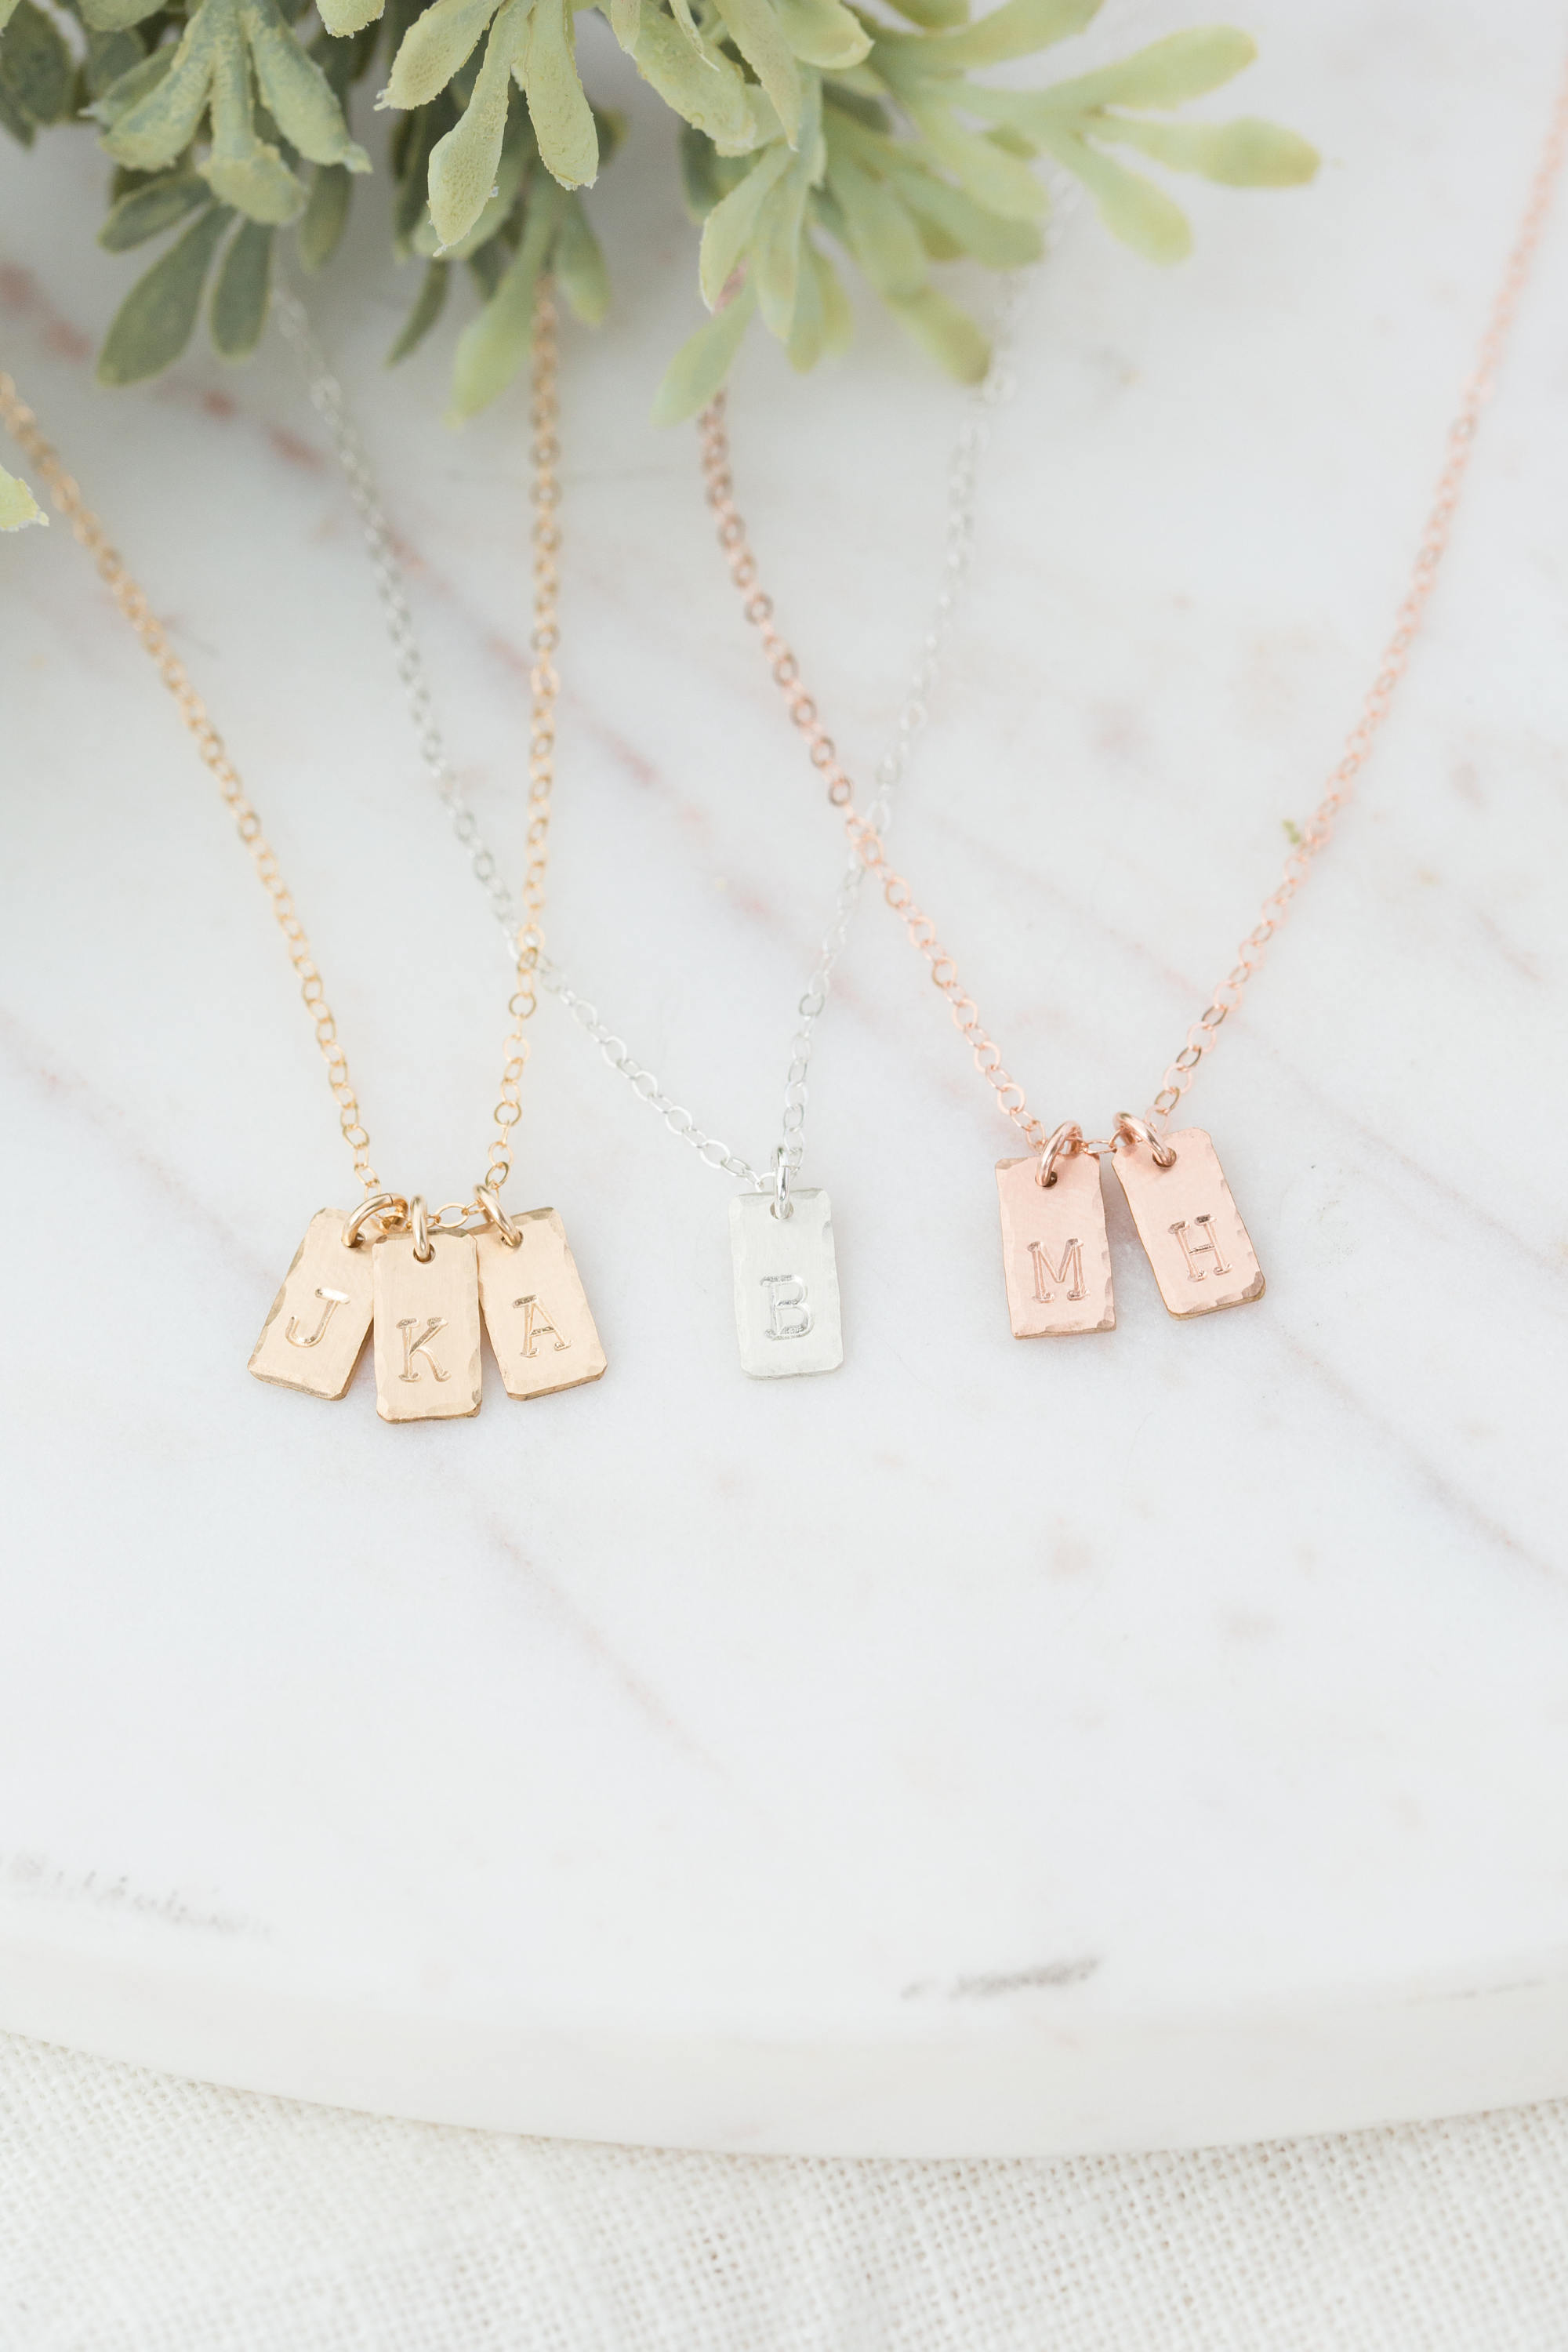 10 Lovely Pieces of Personalized Jewelry